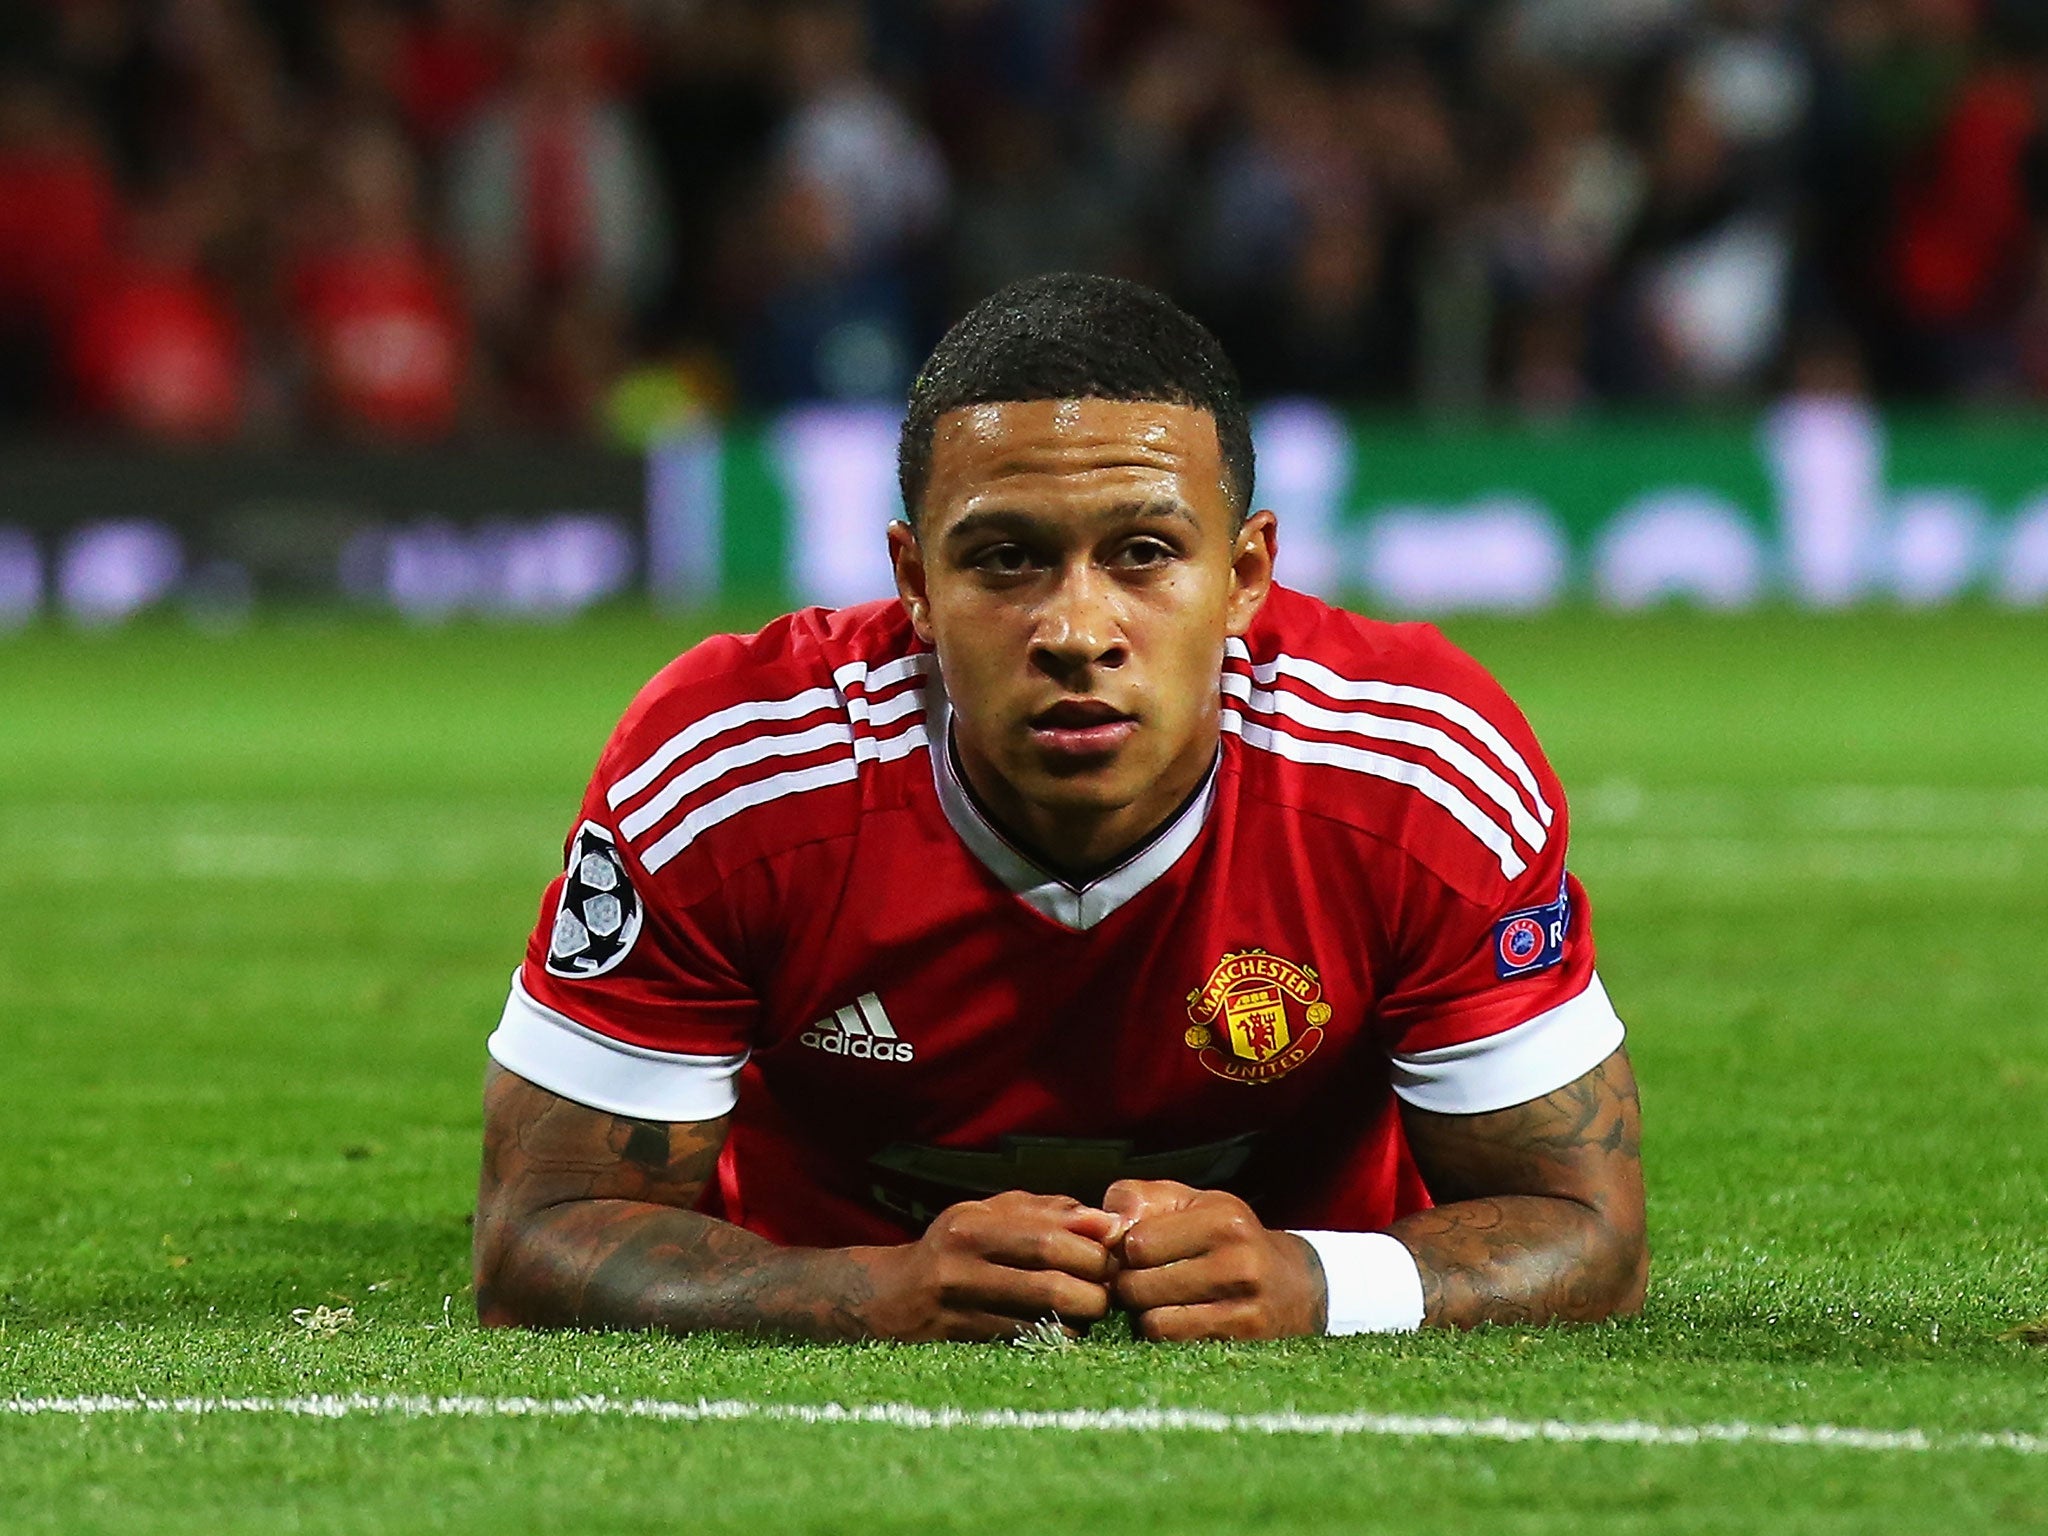 Memphis Depay will be 'eaten raw' on return to PSV Eindhoven as a